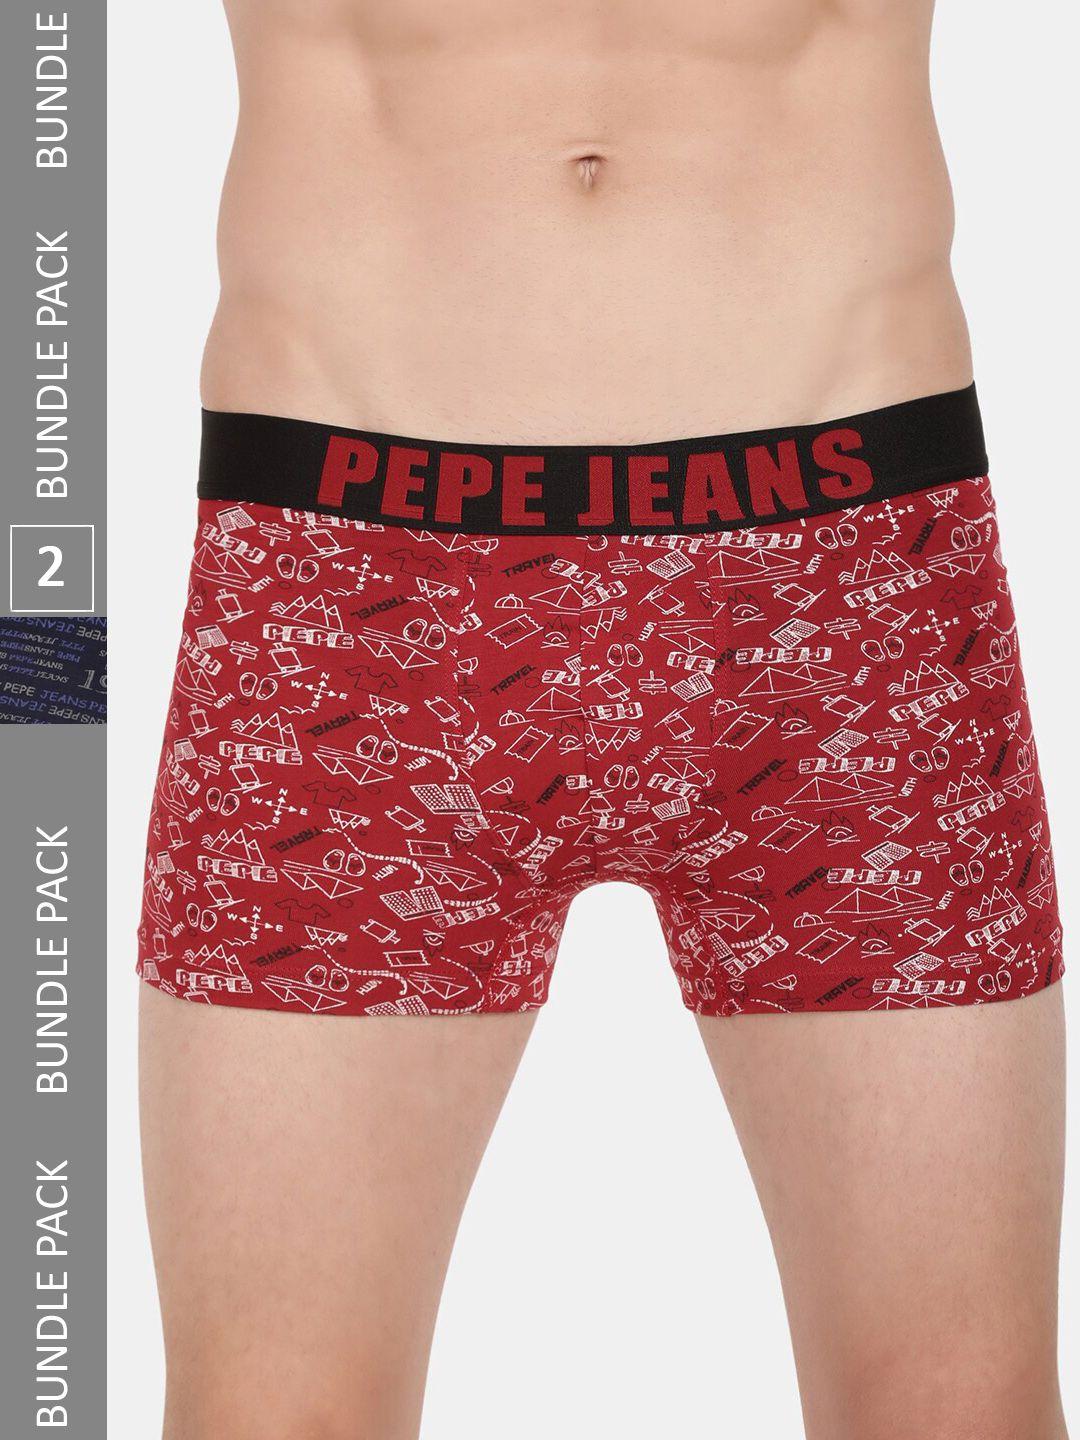 pepe jeans men pack of 2 all over printed cotton trunks